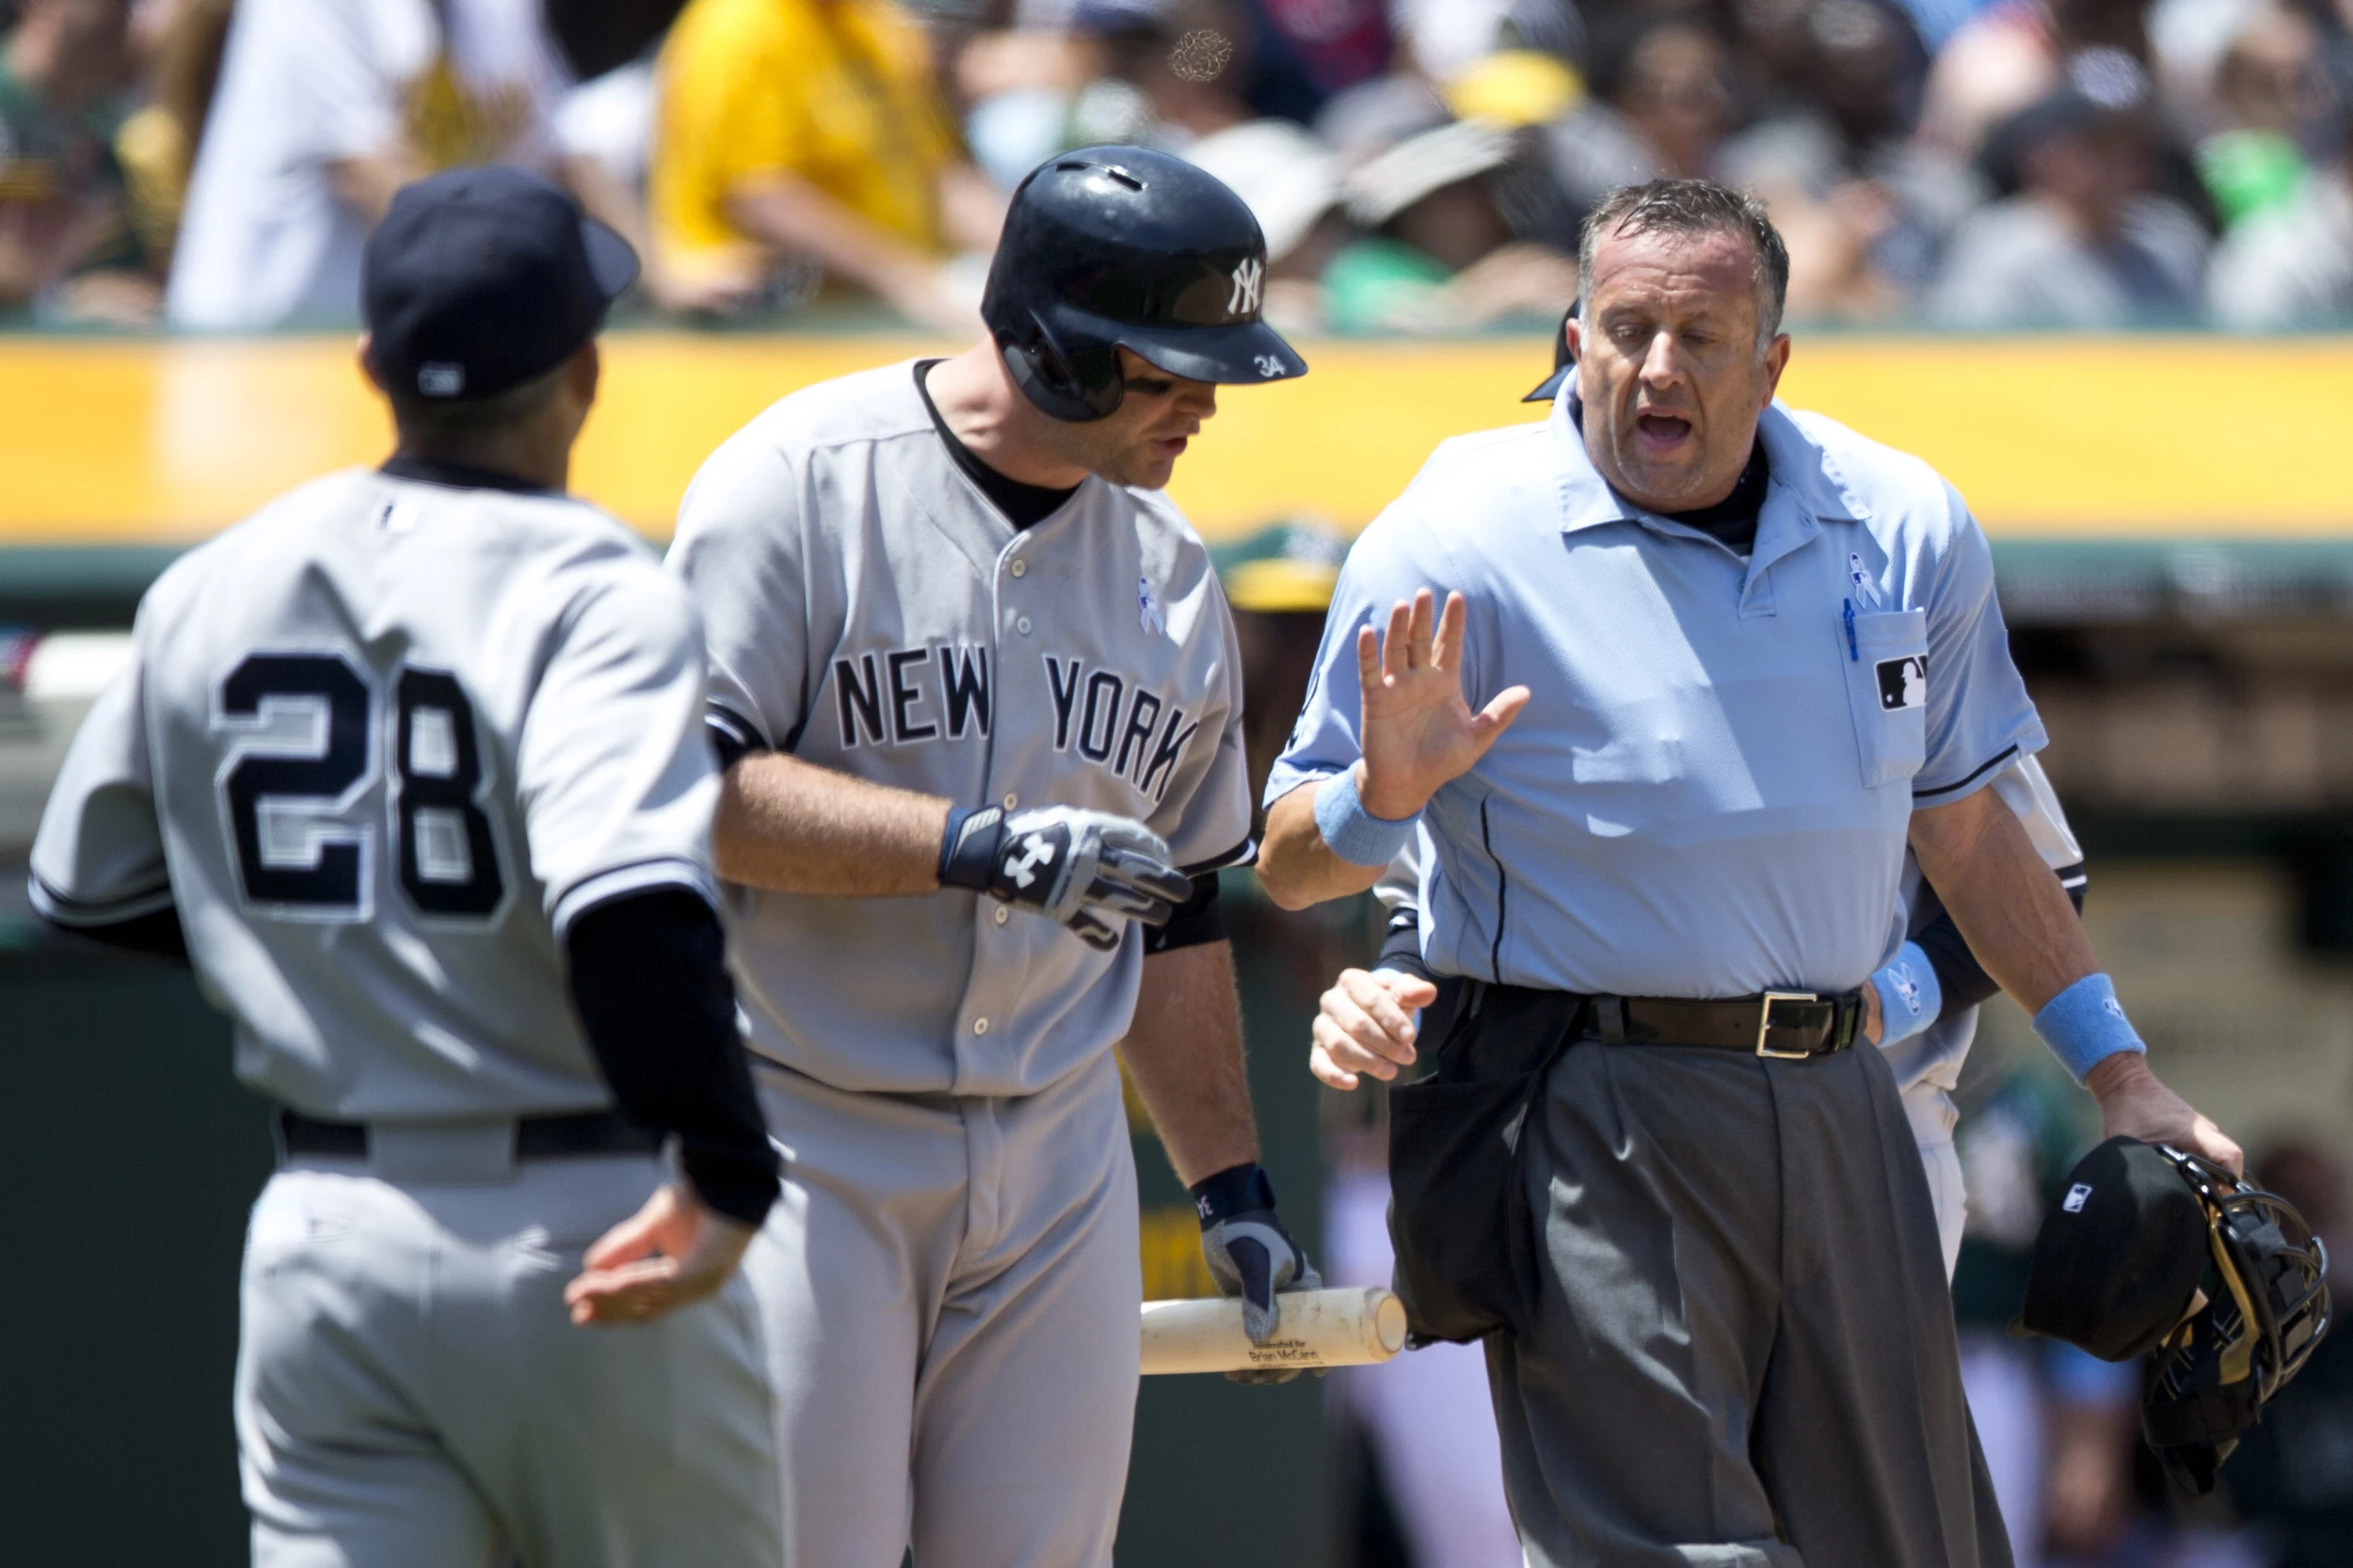 Dale, we know you're gay.' How a Major League Baseball umpire came out -  Outsports